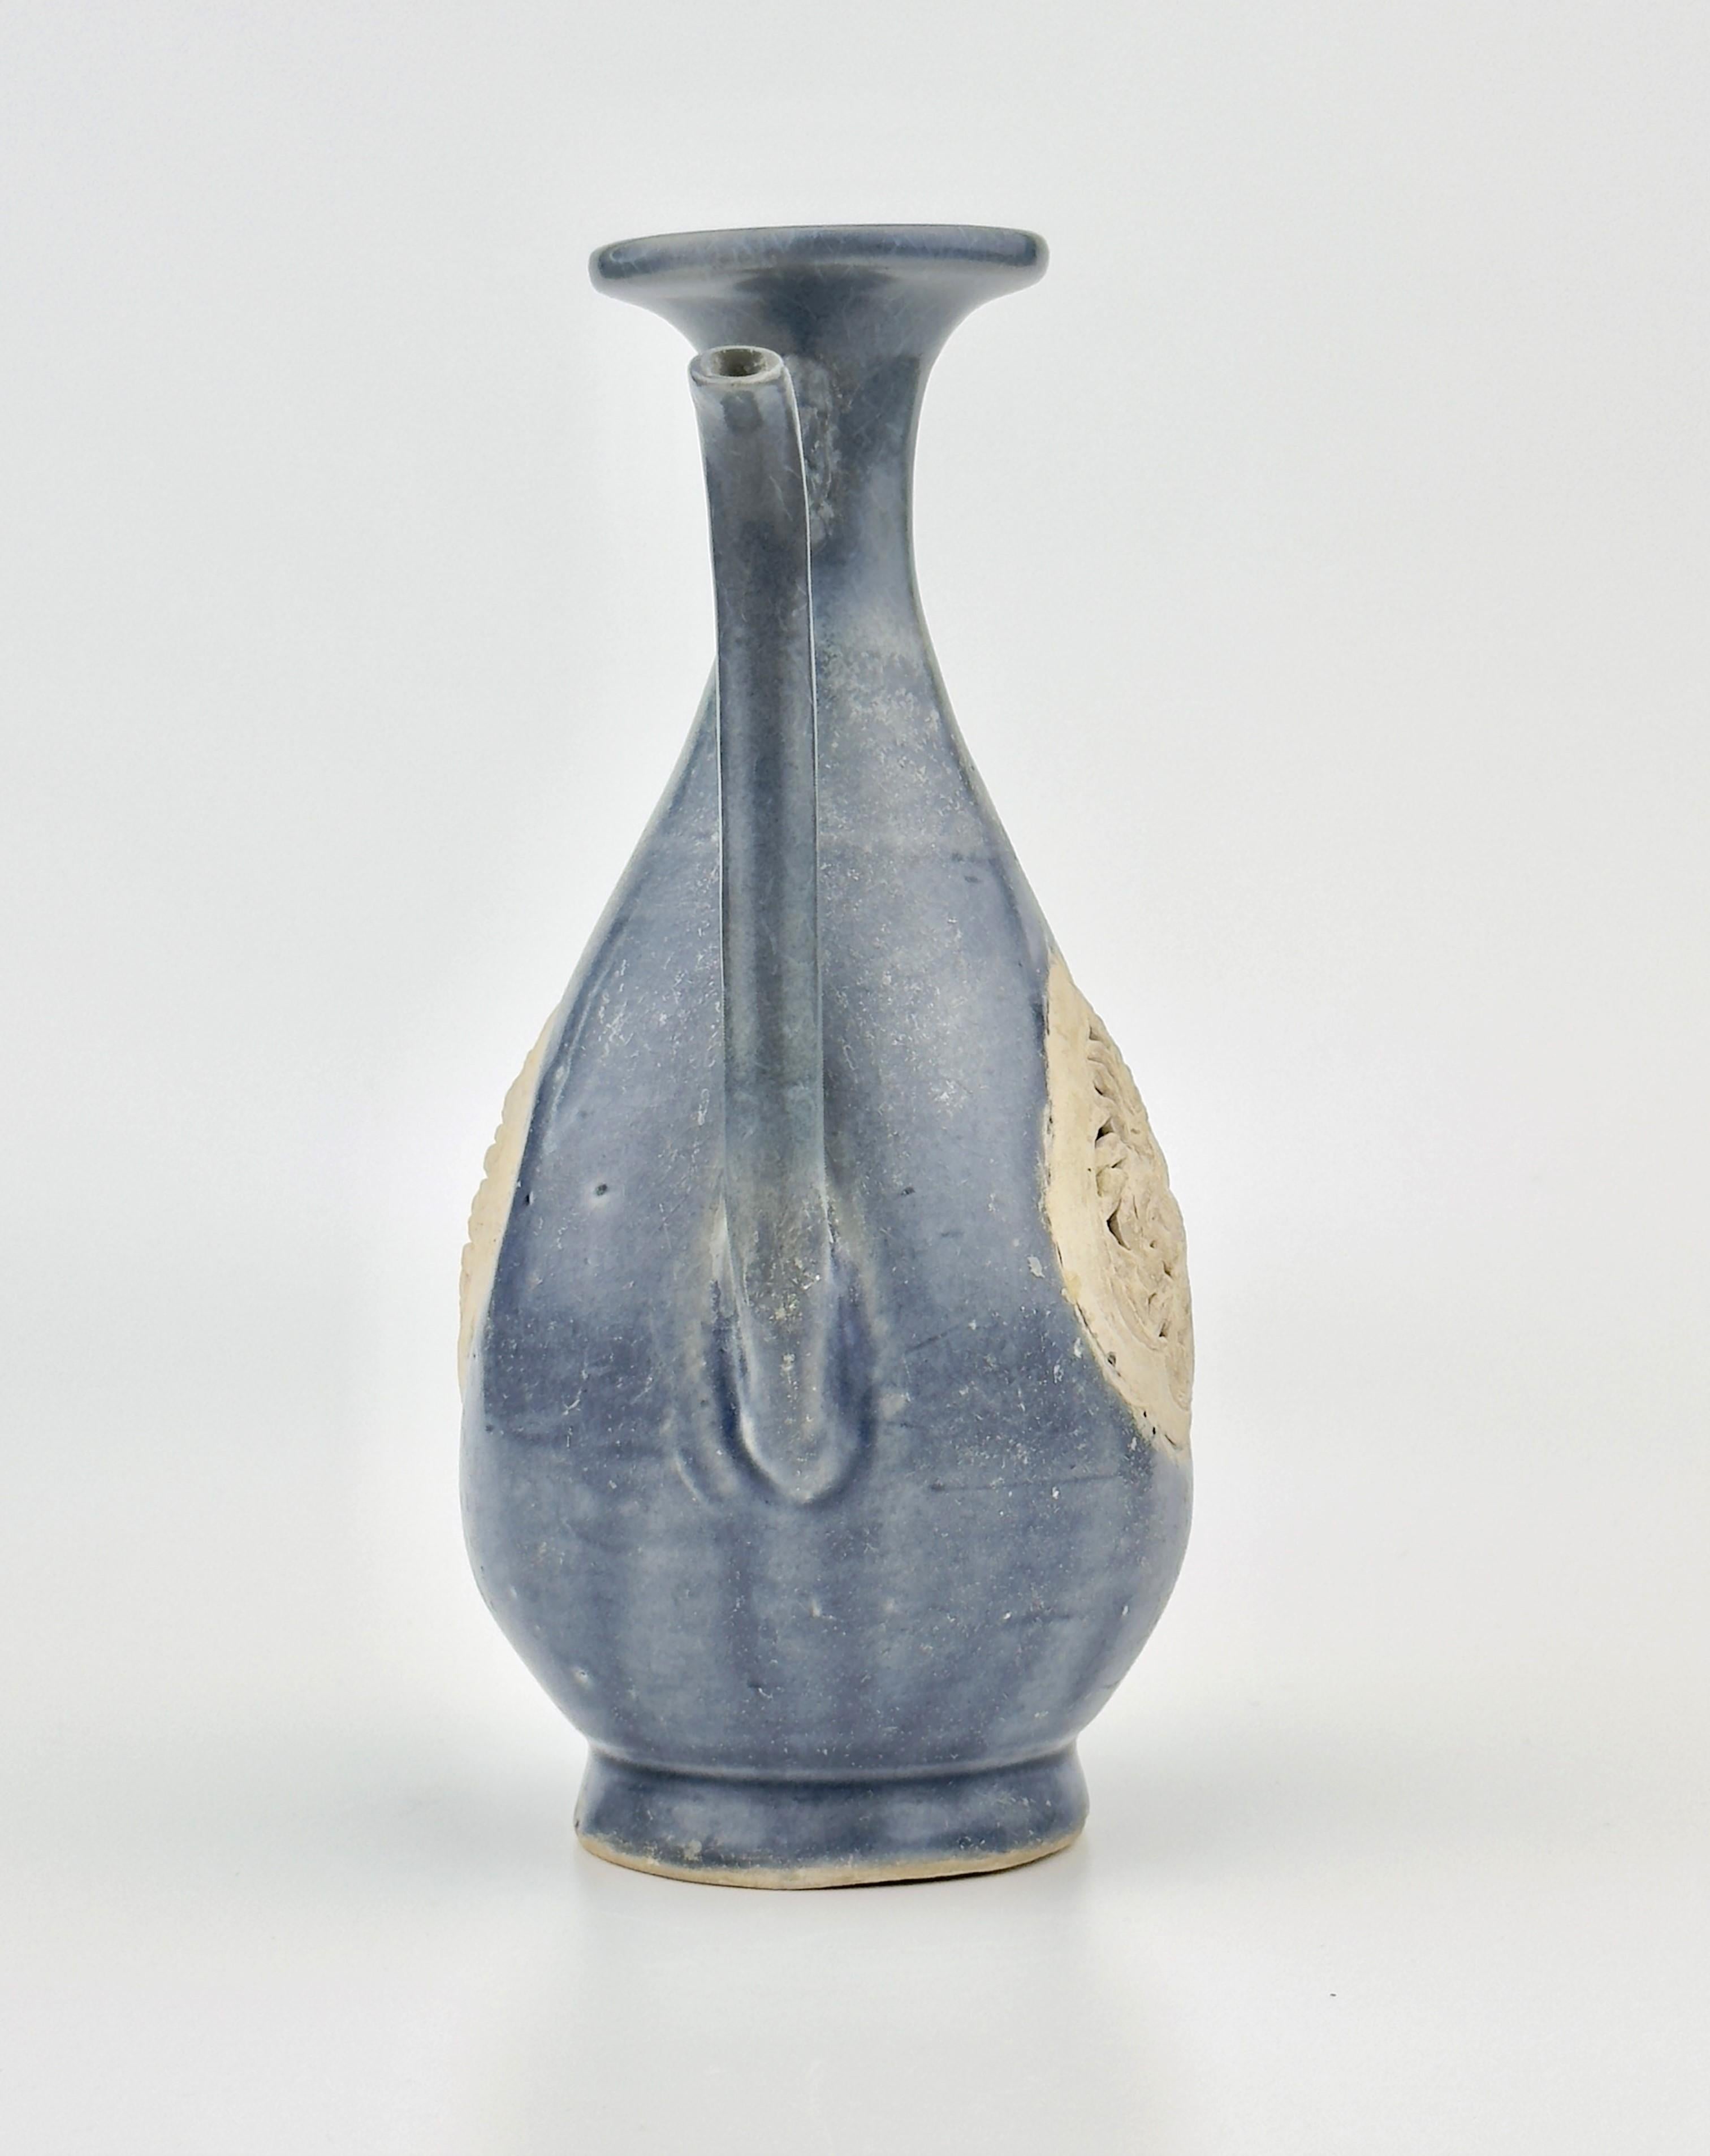 Stoneware painted with underglaze cobalt blue and remnants of overglaze enamel.

Year/Period : 15th century
Region : North Vietnam
Type : Ewer
Found/Acquired : Southeast Asia , South China Sea, Hoi An Ship
Reference : 
1) Phoenix Art Museum - OBJECT